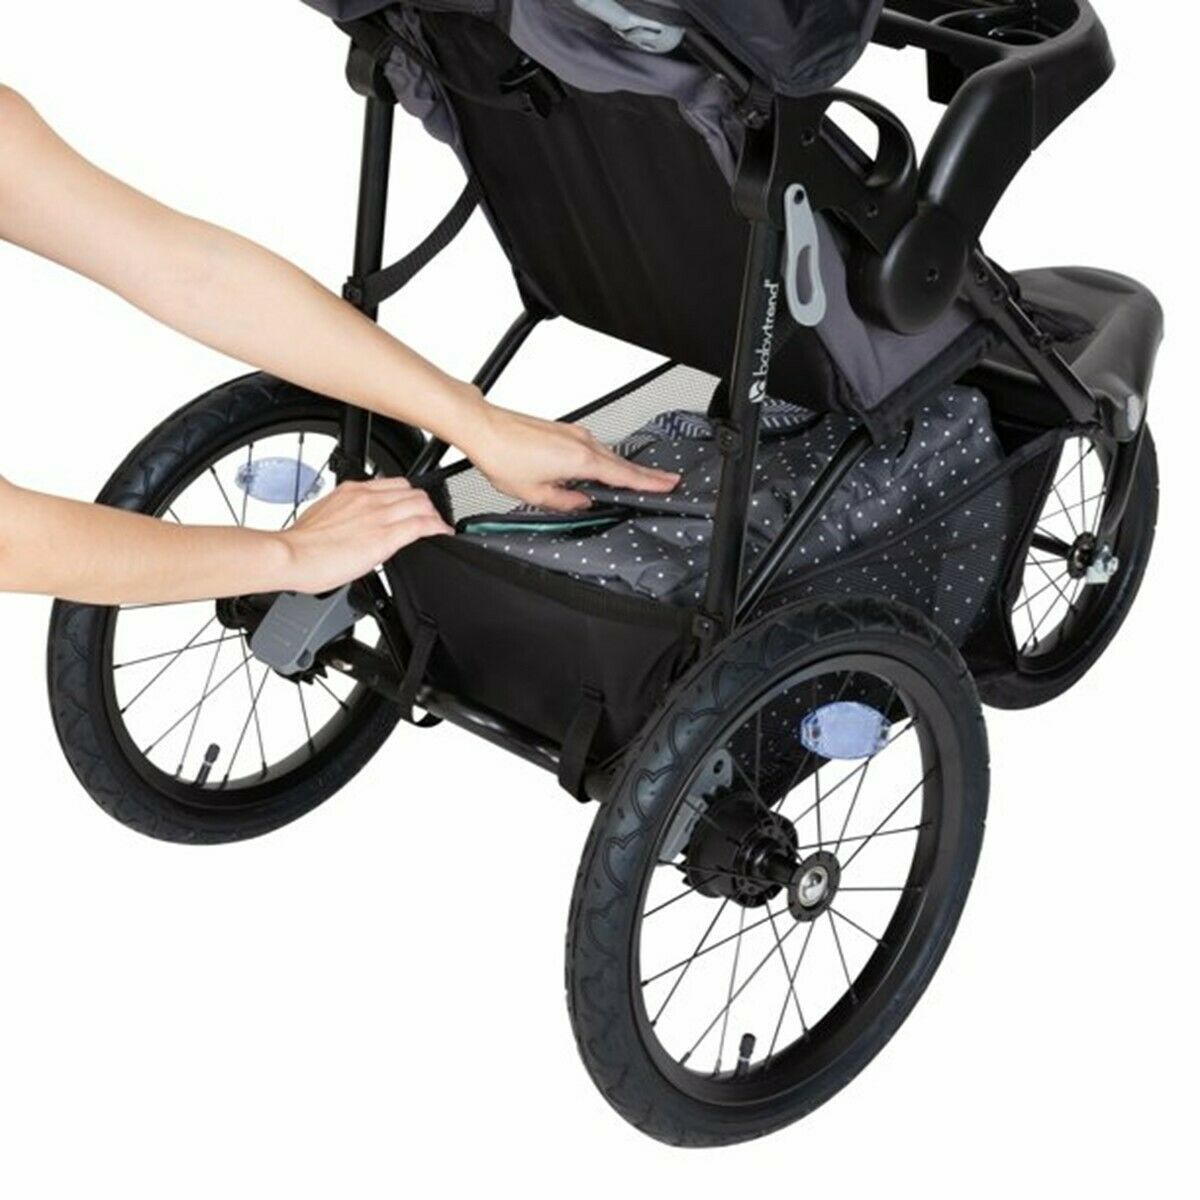 Baby Trend Xcel R8 Jogging Stroller with Multiple Position Reclining Seat